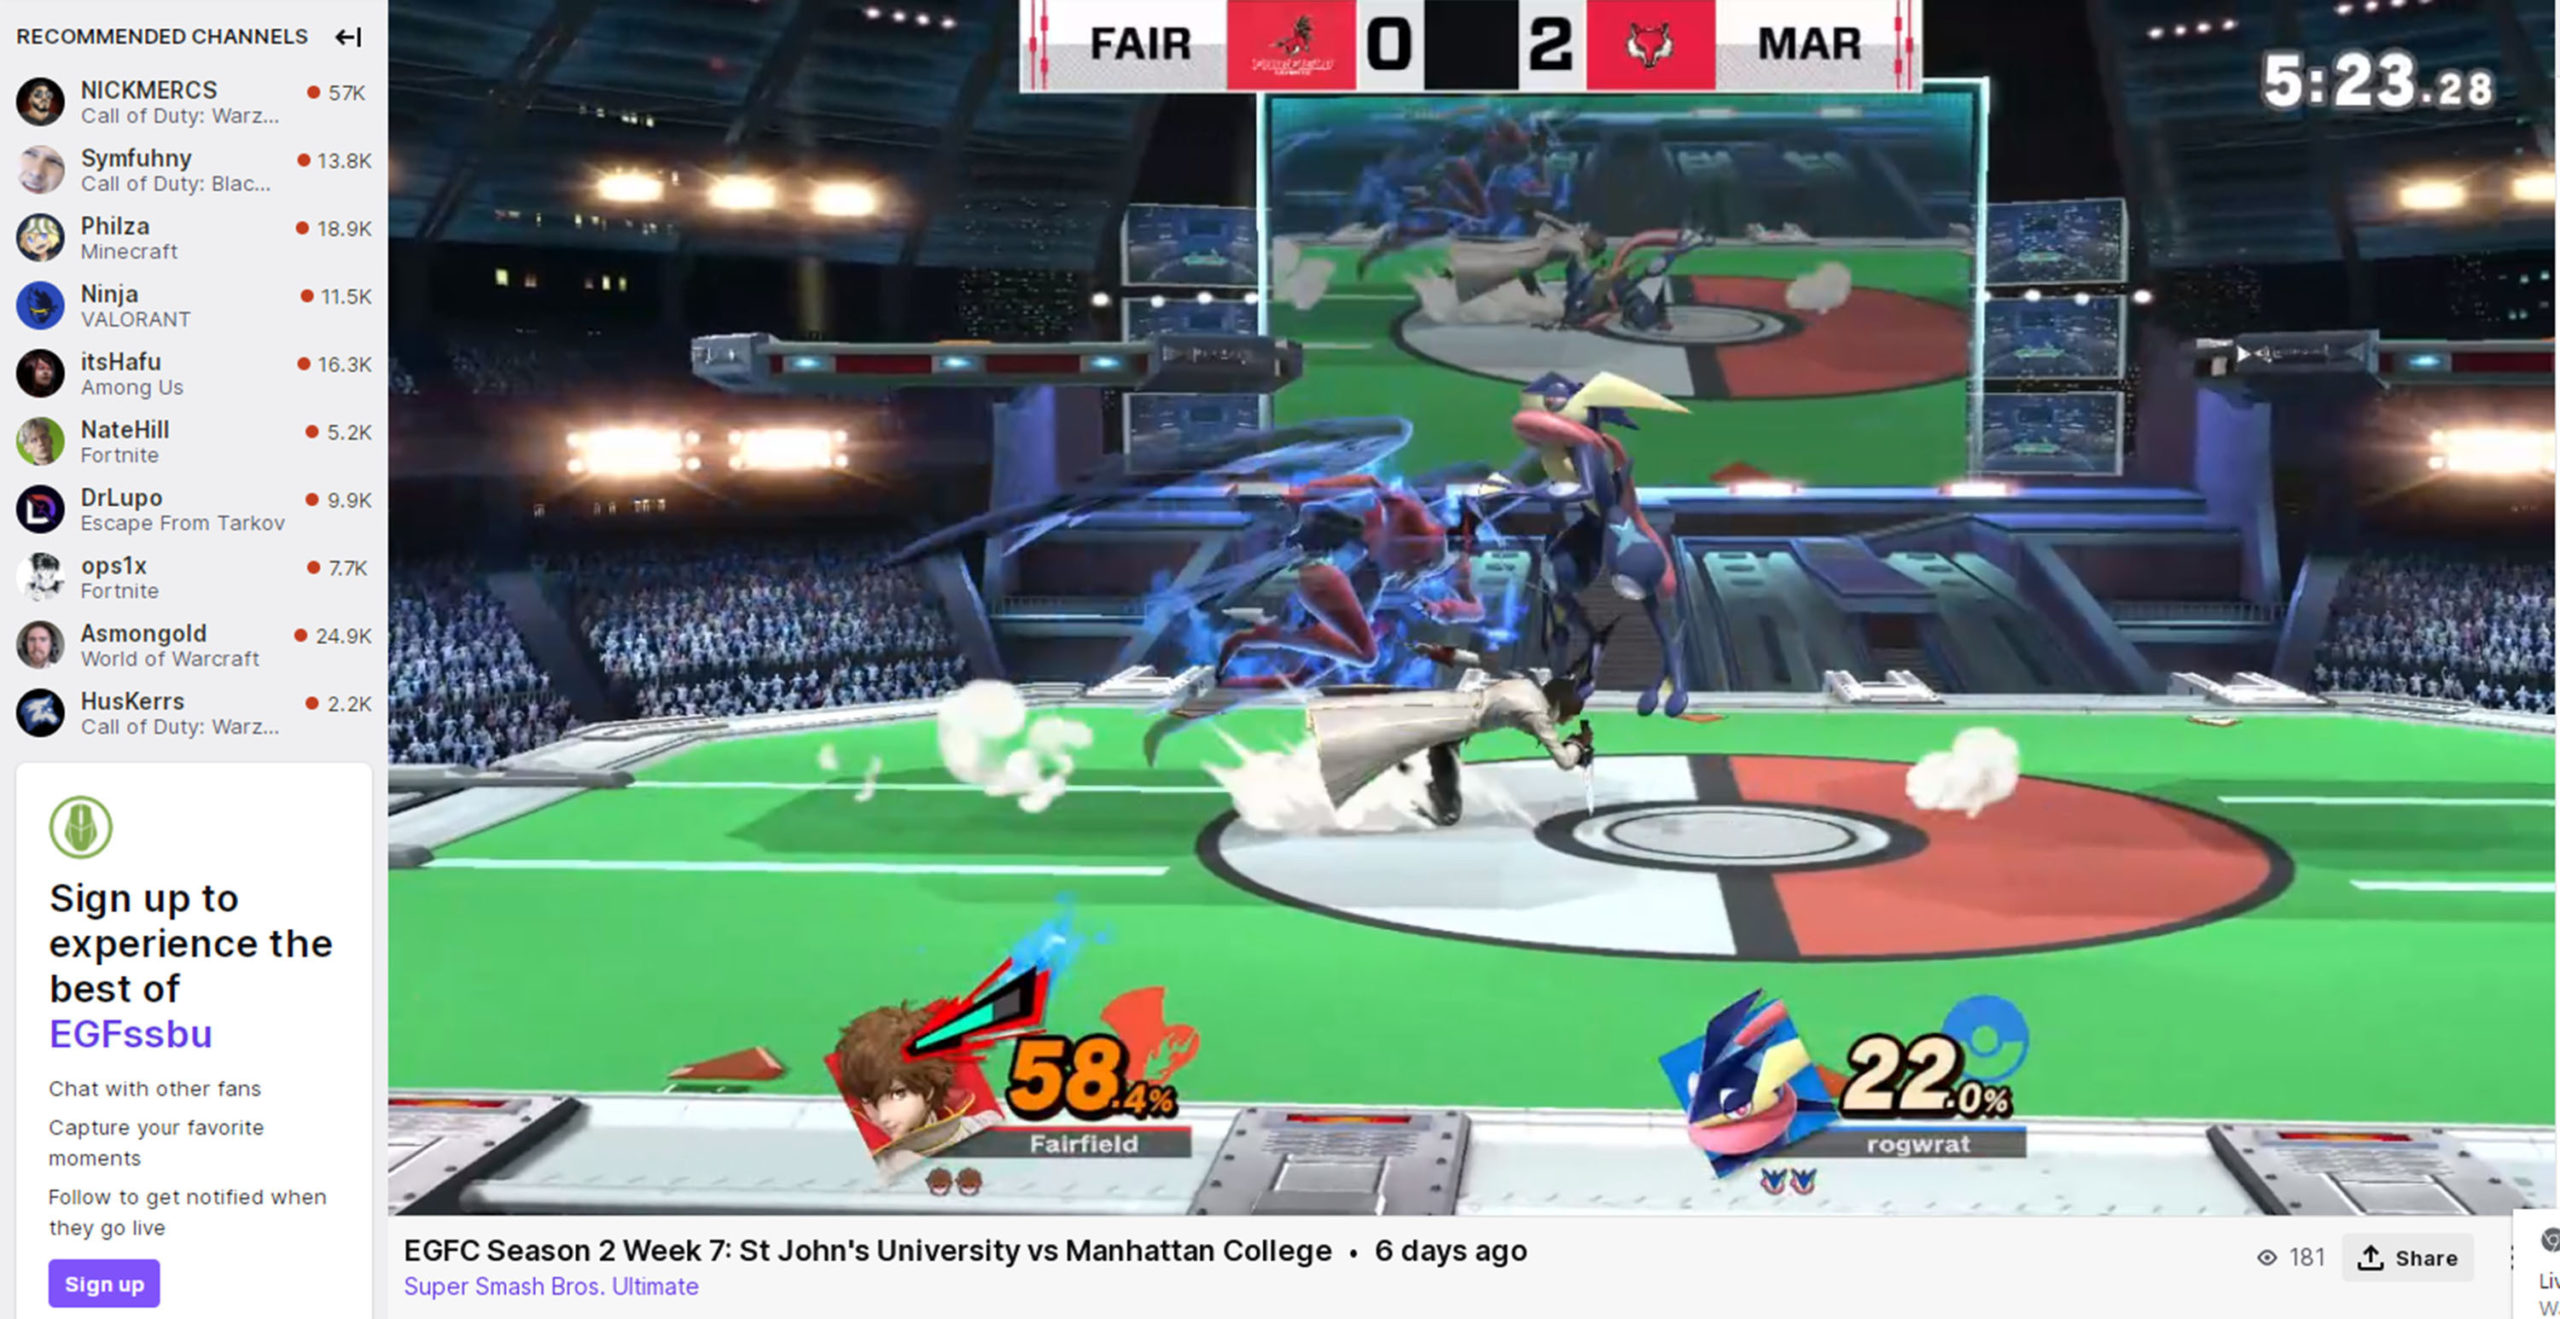 College teams play Super Smash Brothers online. 